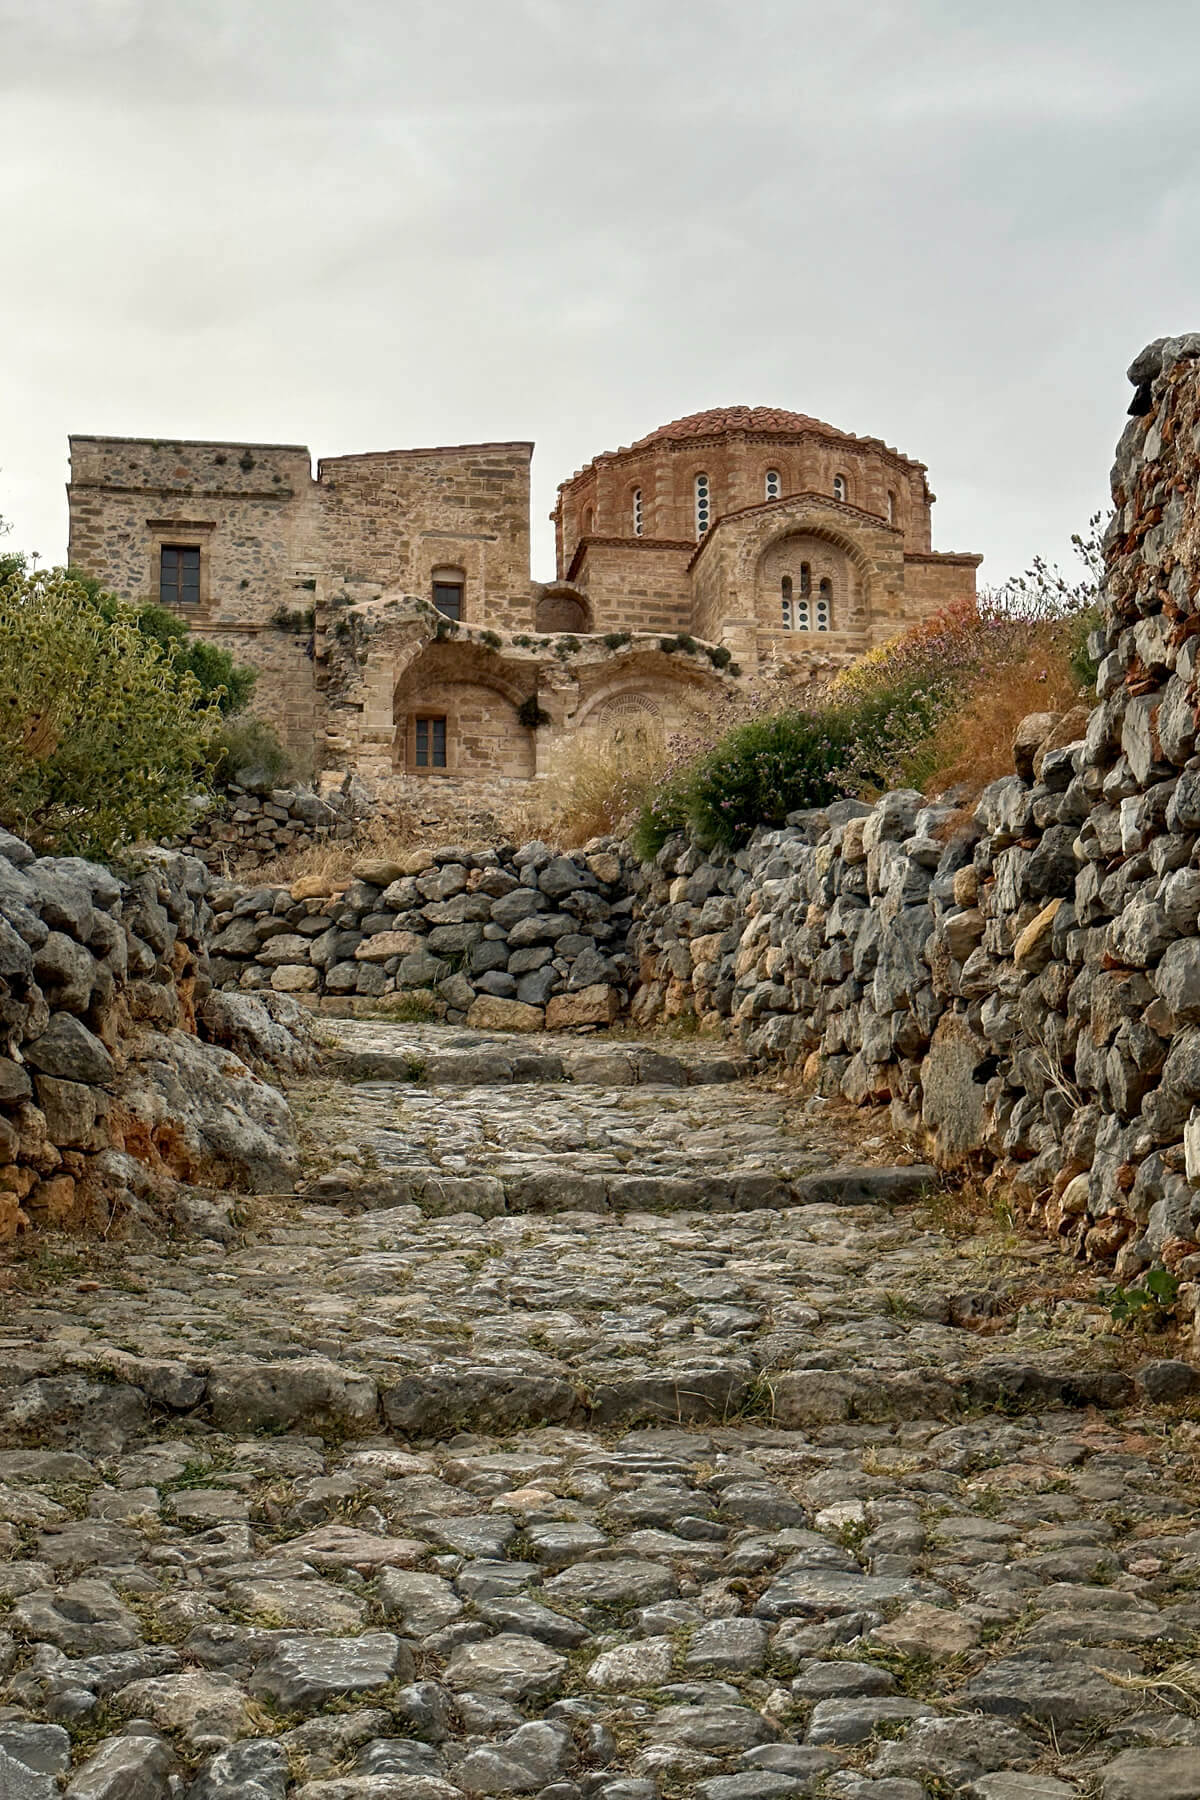 Byzantine Church in Monemvasia Greece with a stone path and walls leading up to it